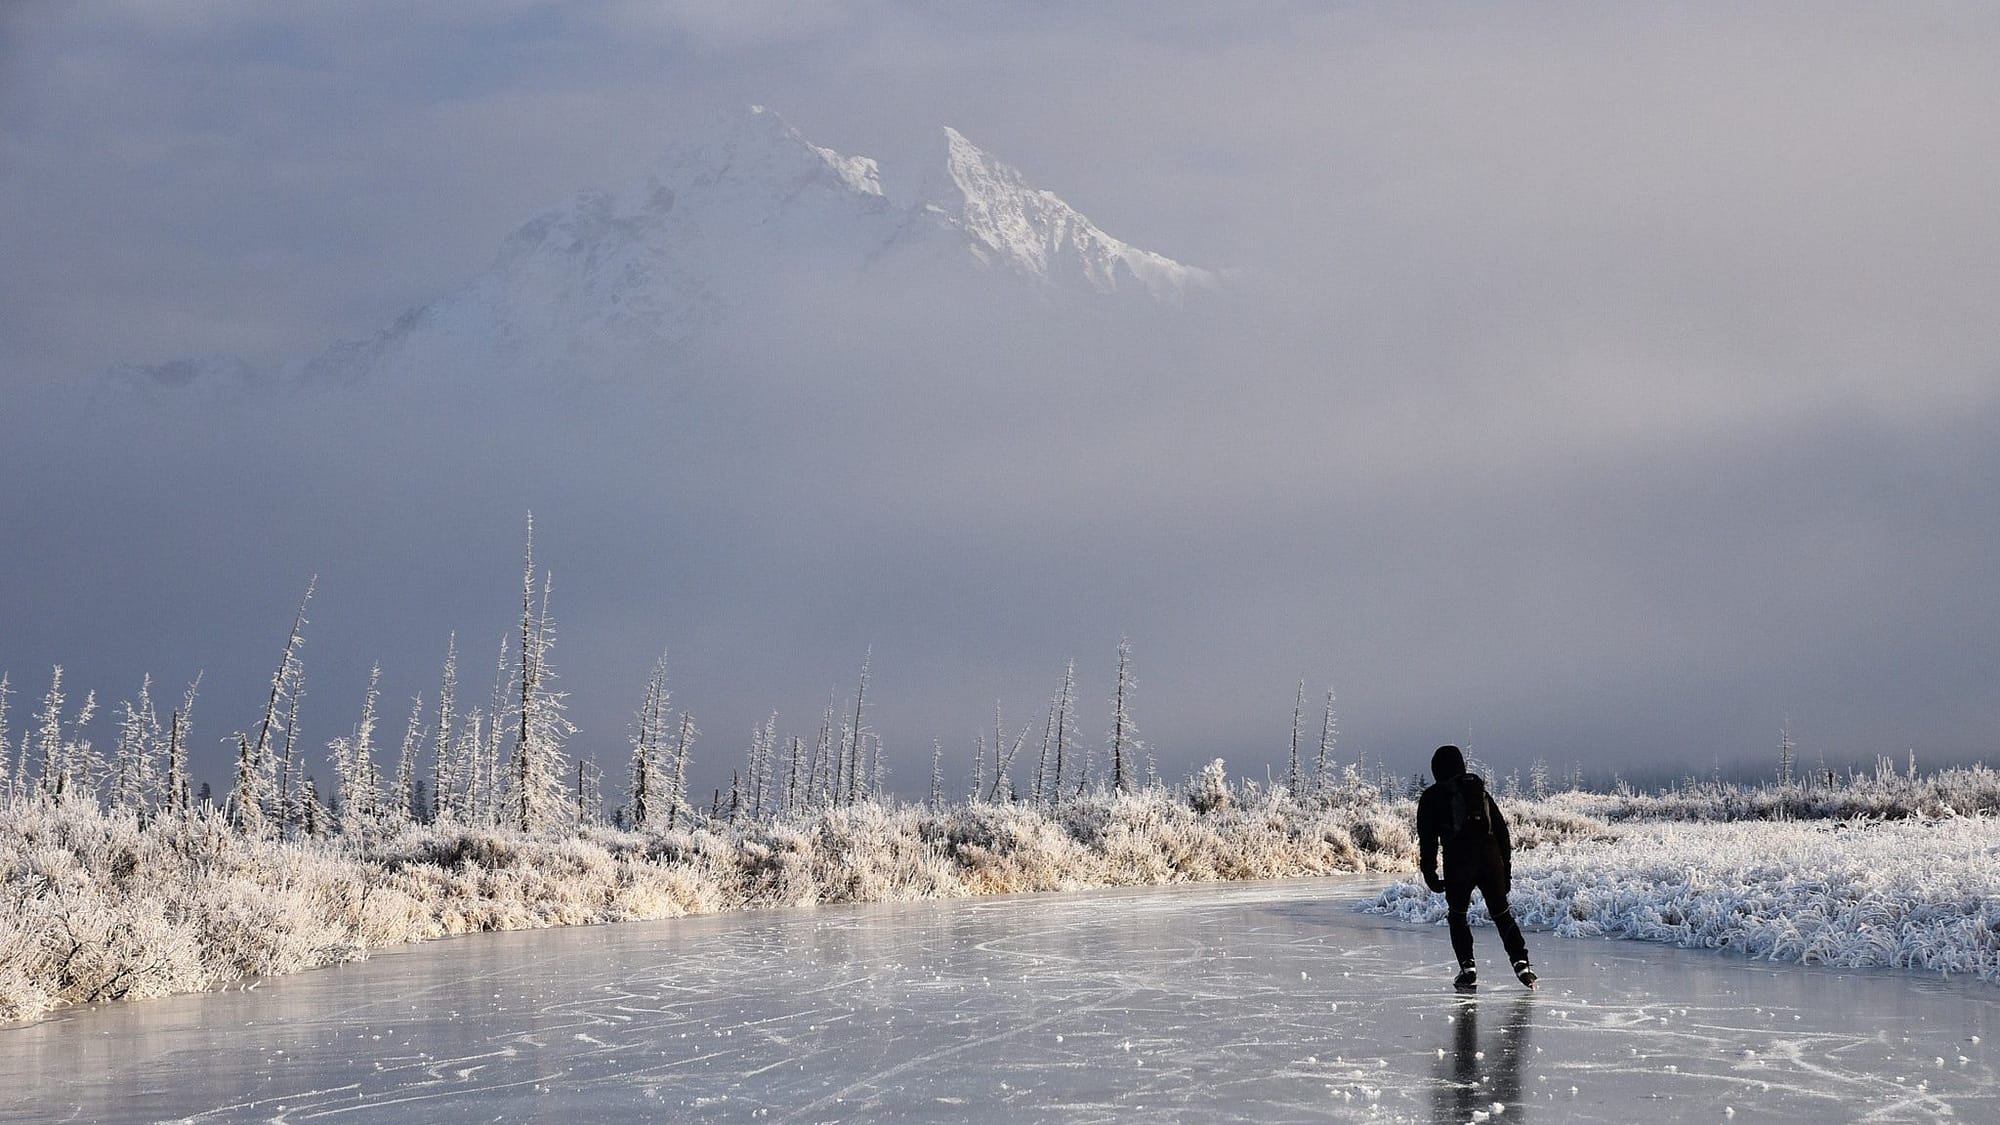 Image: lone ice skater skating in the wilderness with a mountain in the background